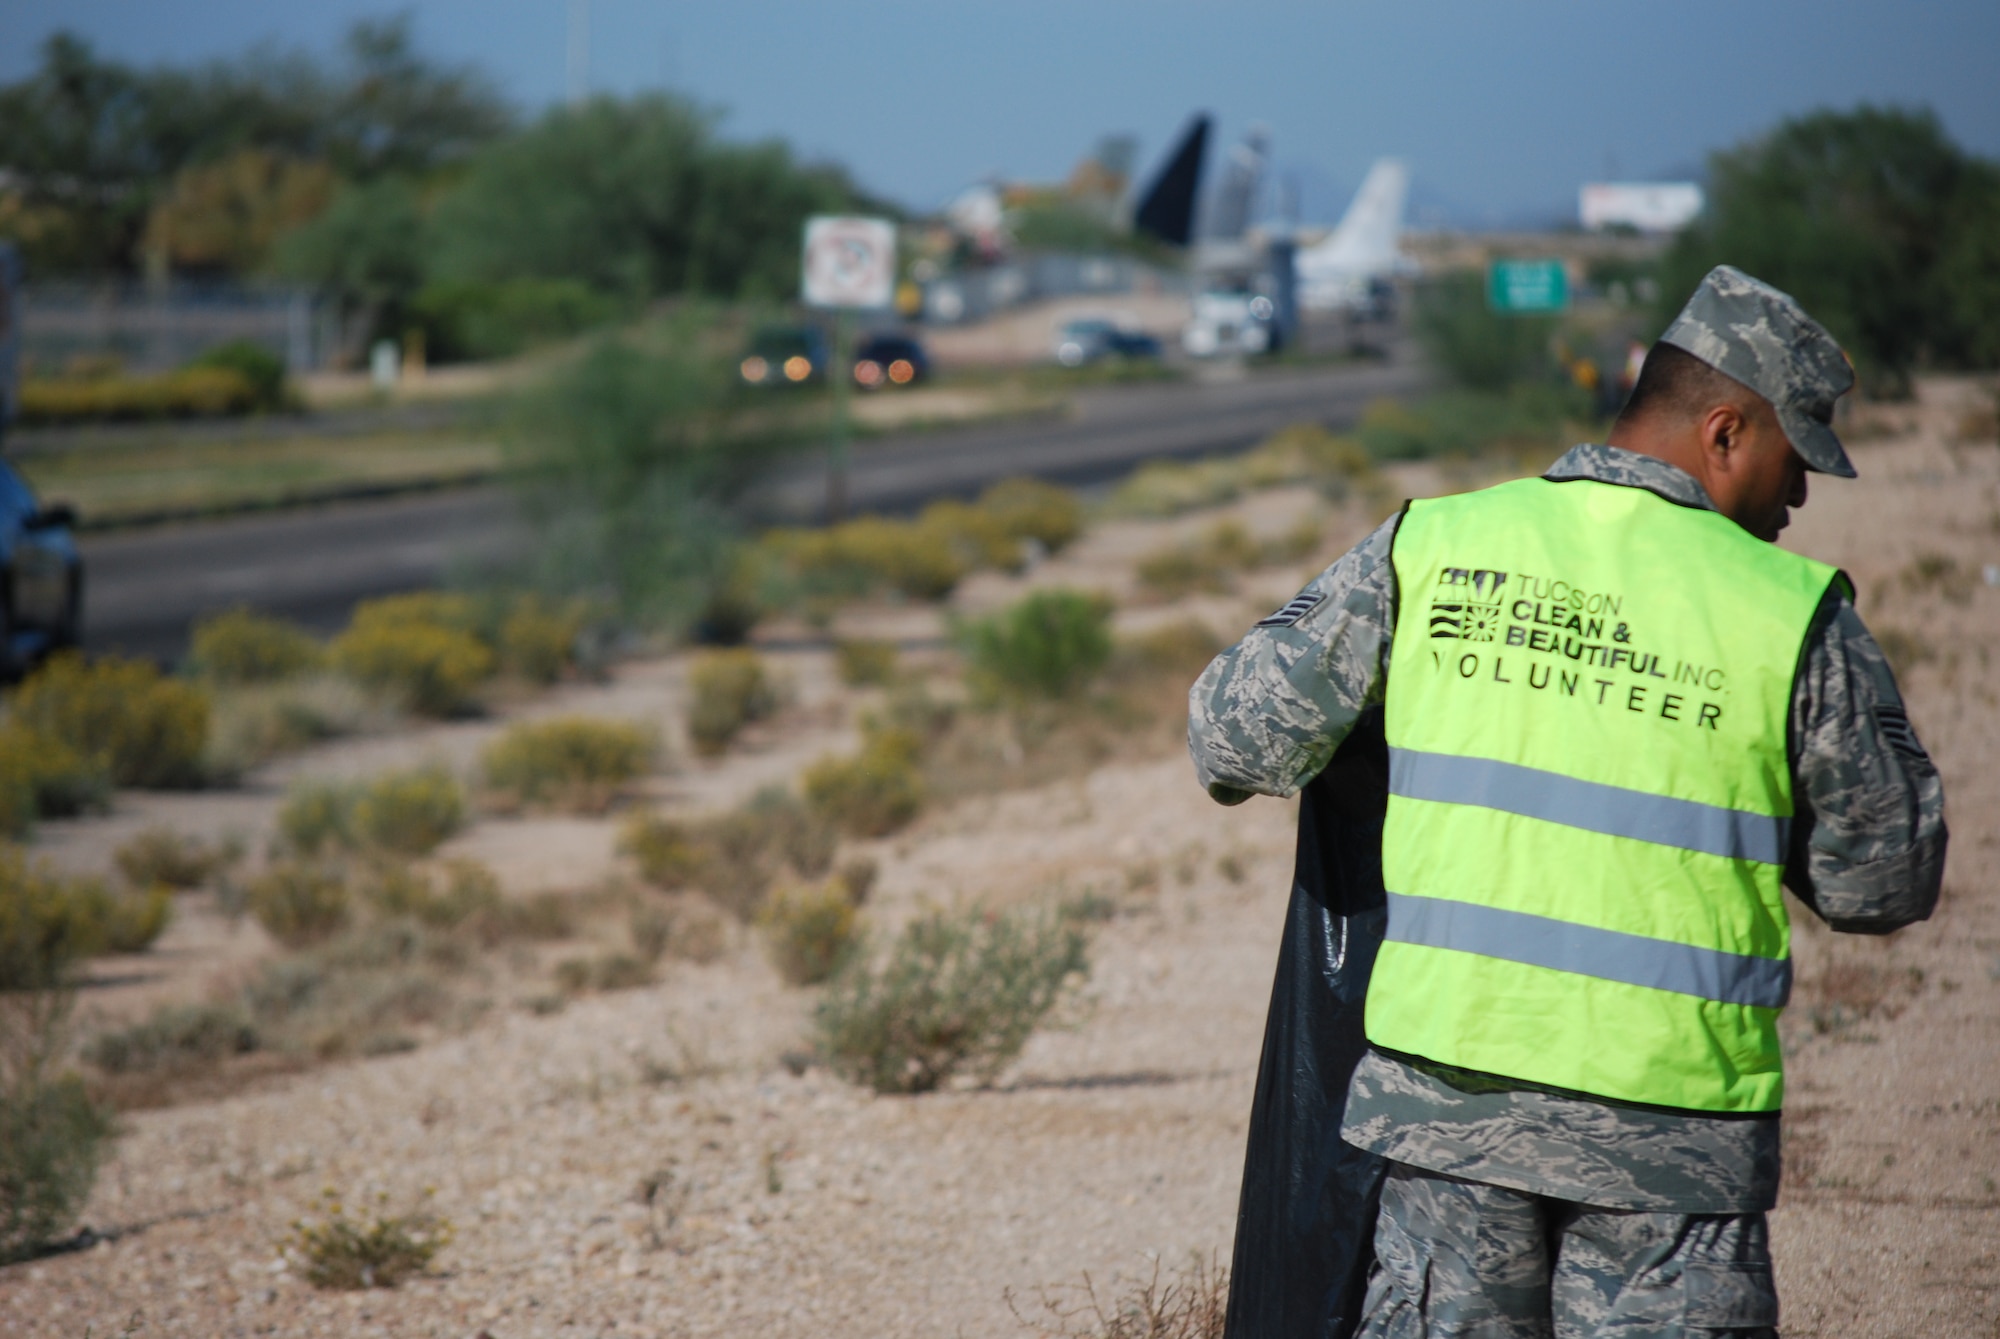 Members of 12th Air Force (Air Forces Southern) volunteer as part of the Tucson Clean and Beautiful program to clear area roadways of trash and debris Oct. 4. More than 20 volunteers participated in the program, clearing a mile-long stretch of highway near the Pima Air Museum in Tucson, Ariz.  12th AF (AFSOUTH), based at nearby Davis-Monthan AFB, is responsible for the combat readiness of 10 active-duty wings by preparing Airmen and more than 730 aircraft for worldwide deployments, including in direct support of combat operations in Afghanistan.  In the organization’s AFSOUTH role, Airmen plan and coordinate U.S. Air Force involvement and partnership building efforts throughout Central America, South America and the Caribbean.  (U.S. Air Force photo by Capt. Justin Brockhoff/Released)